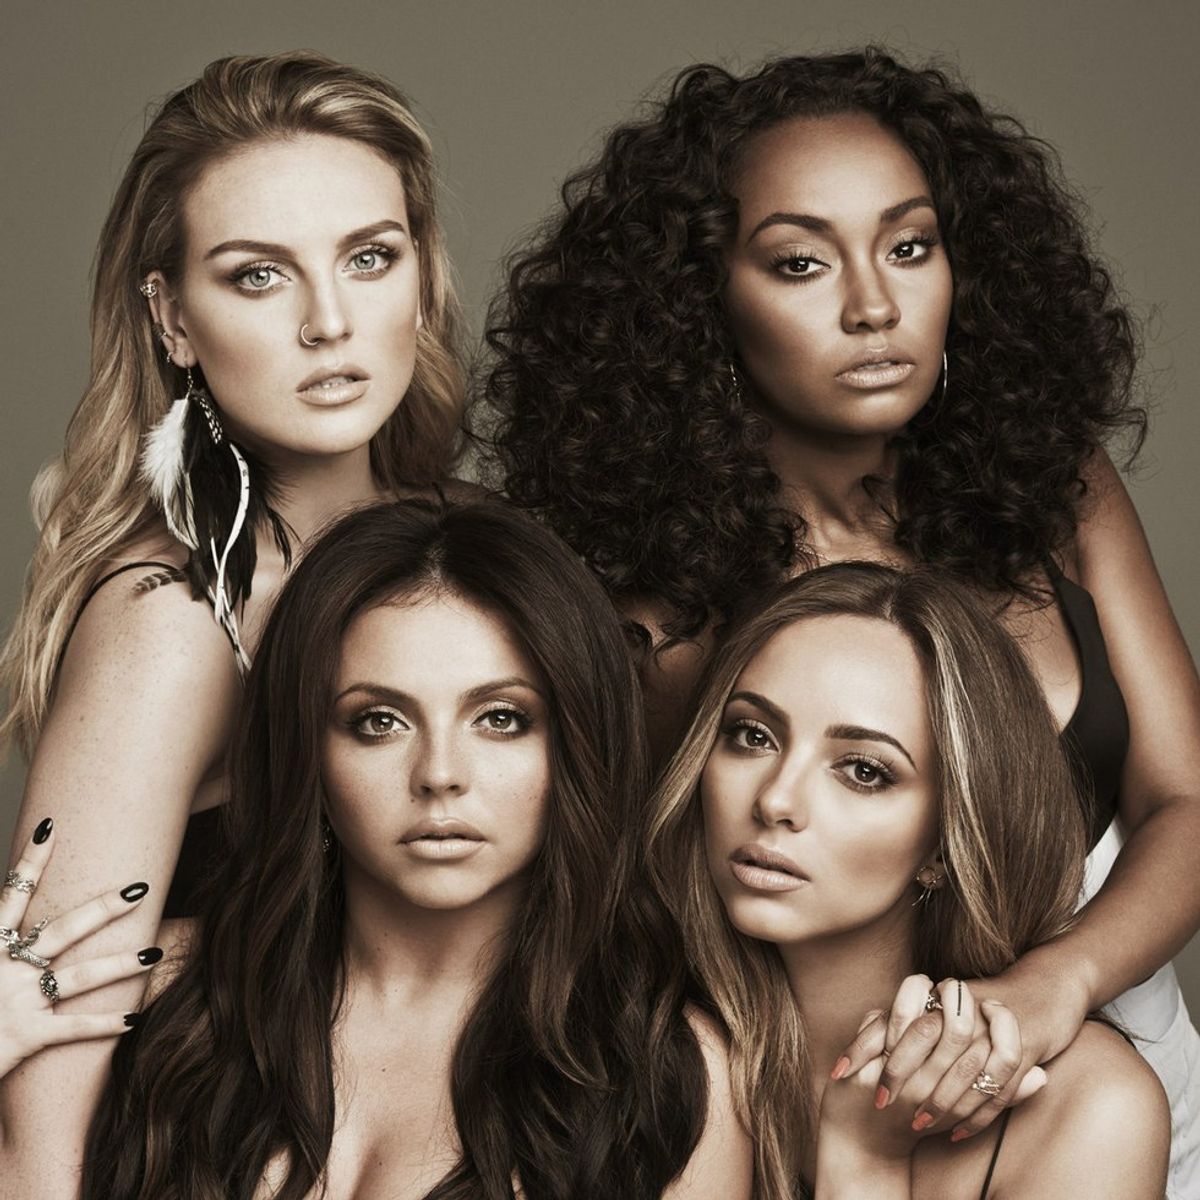 Little Mix: The Next Generation Of Girl Power